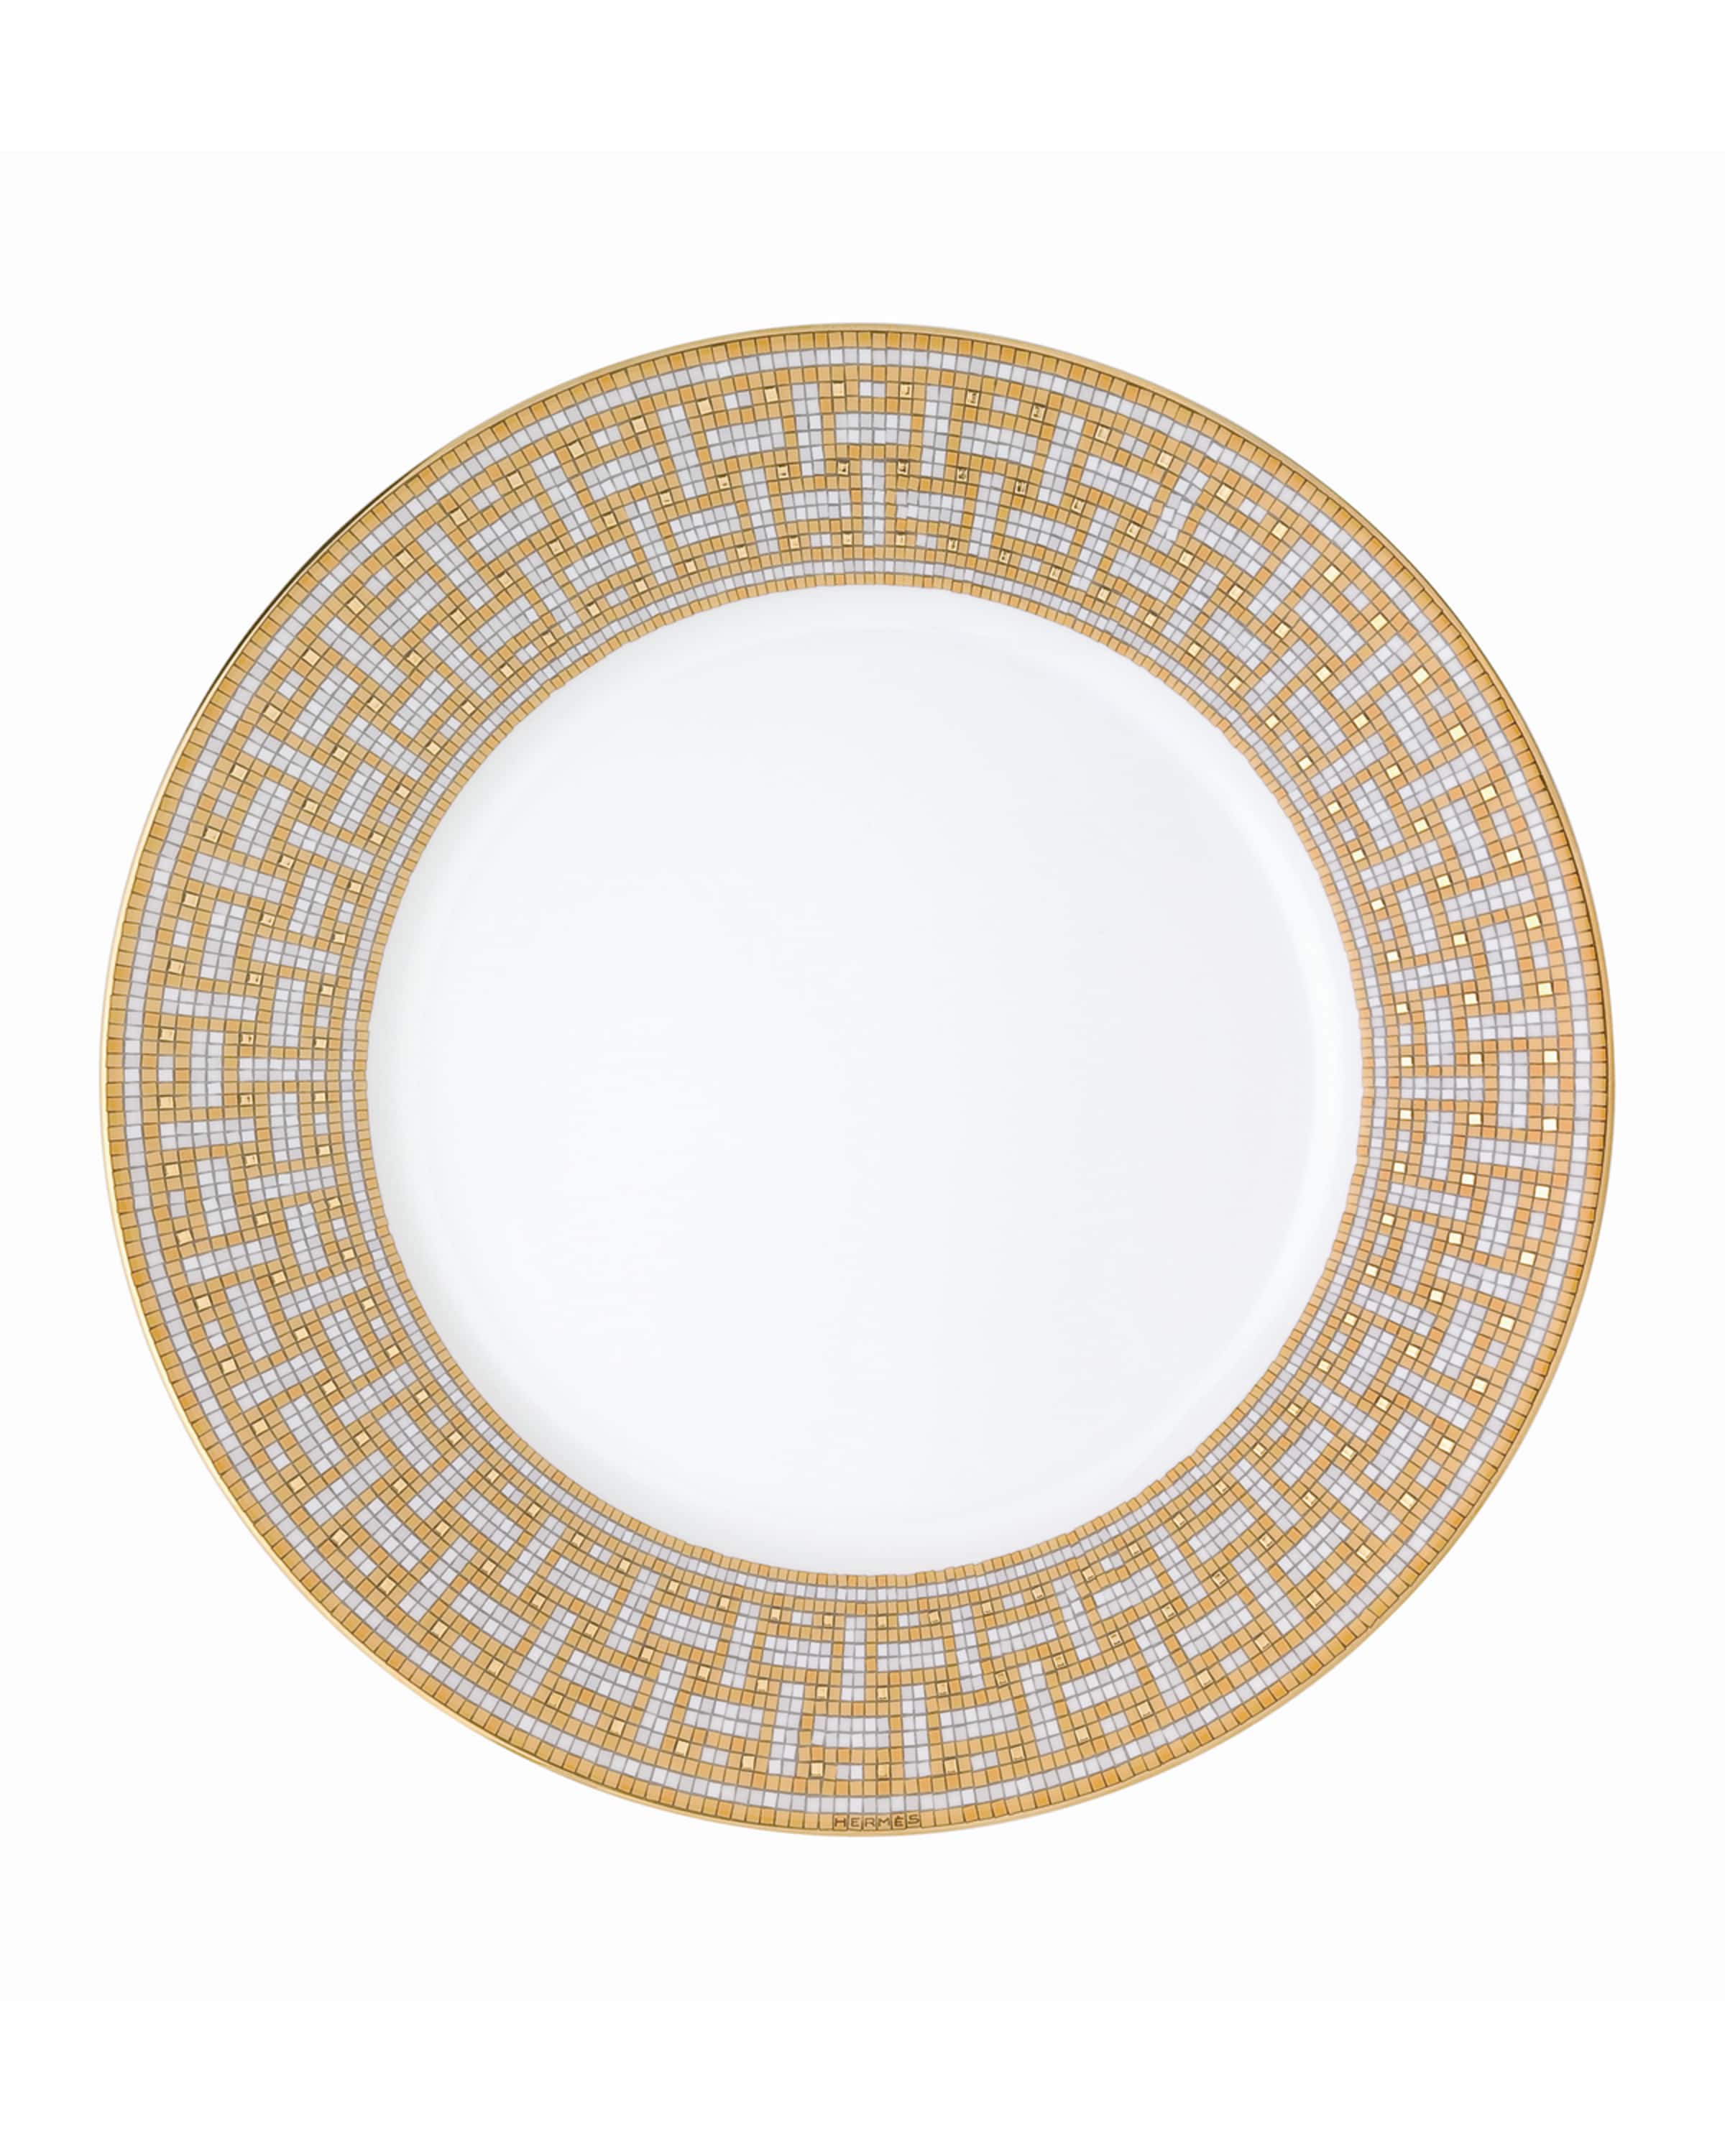 Hermès Mosaique au 24 Dinner Plate and Matching Items & Matching 